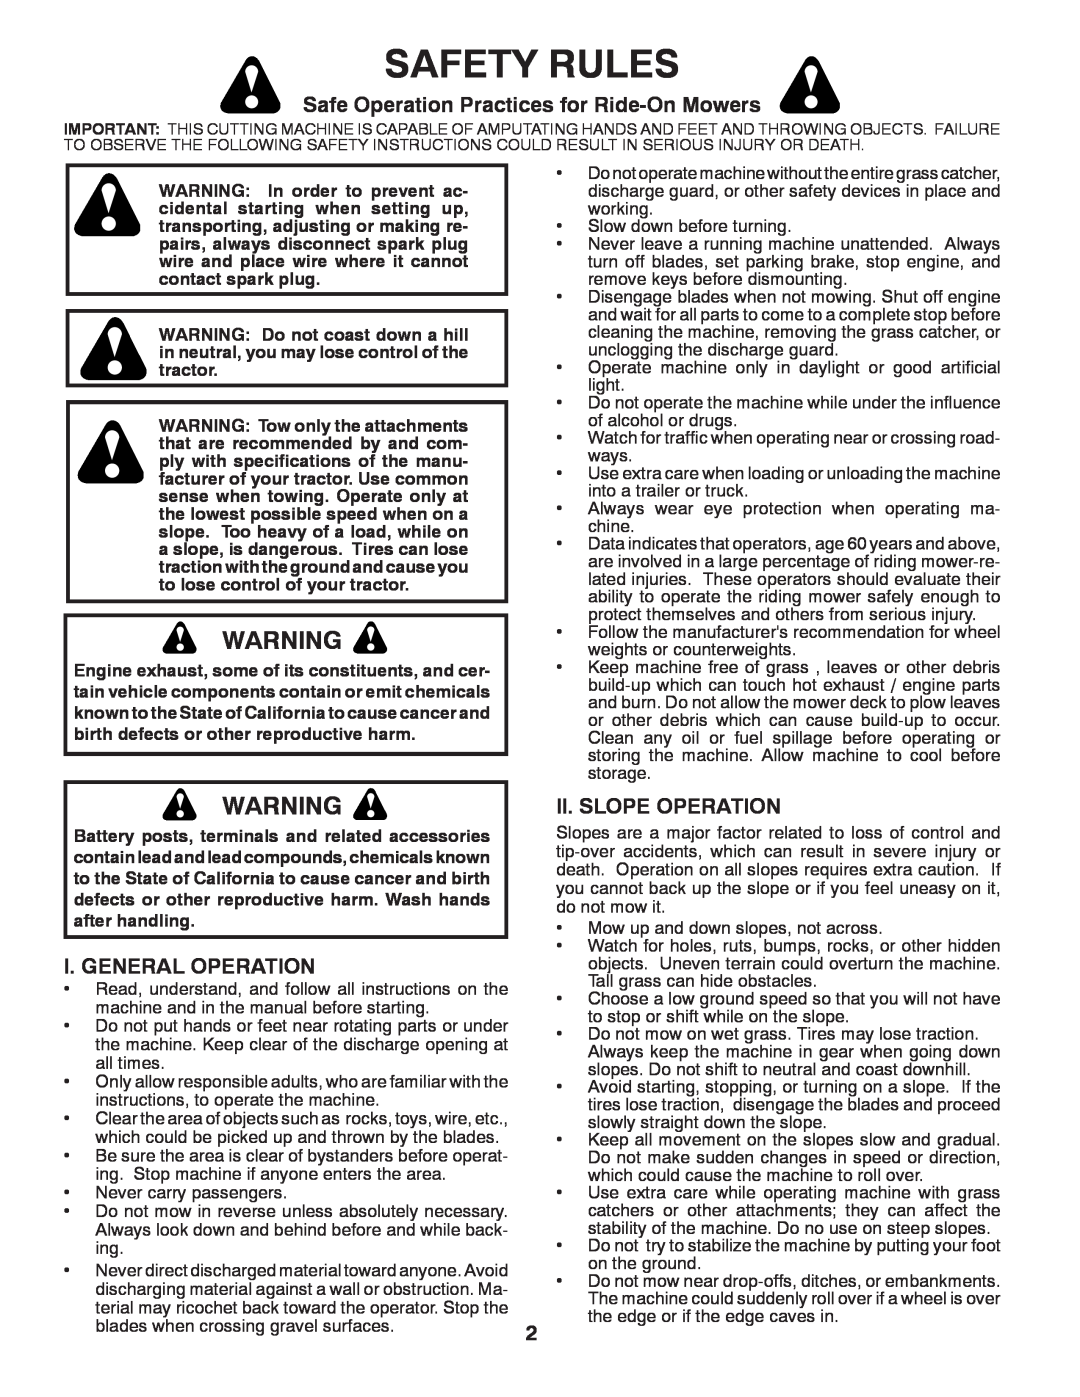 Poulan PK20H42YT manual Safety Rules, Safe Operation Practices for Ride-OnMowers, I. General Operation, Ii. Slope Operation 